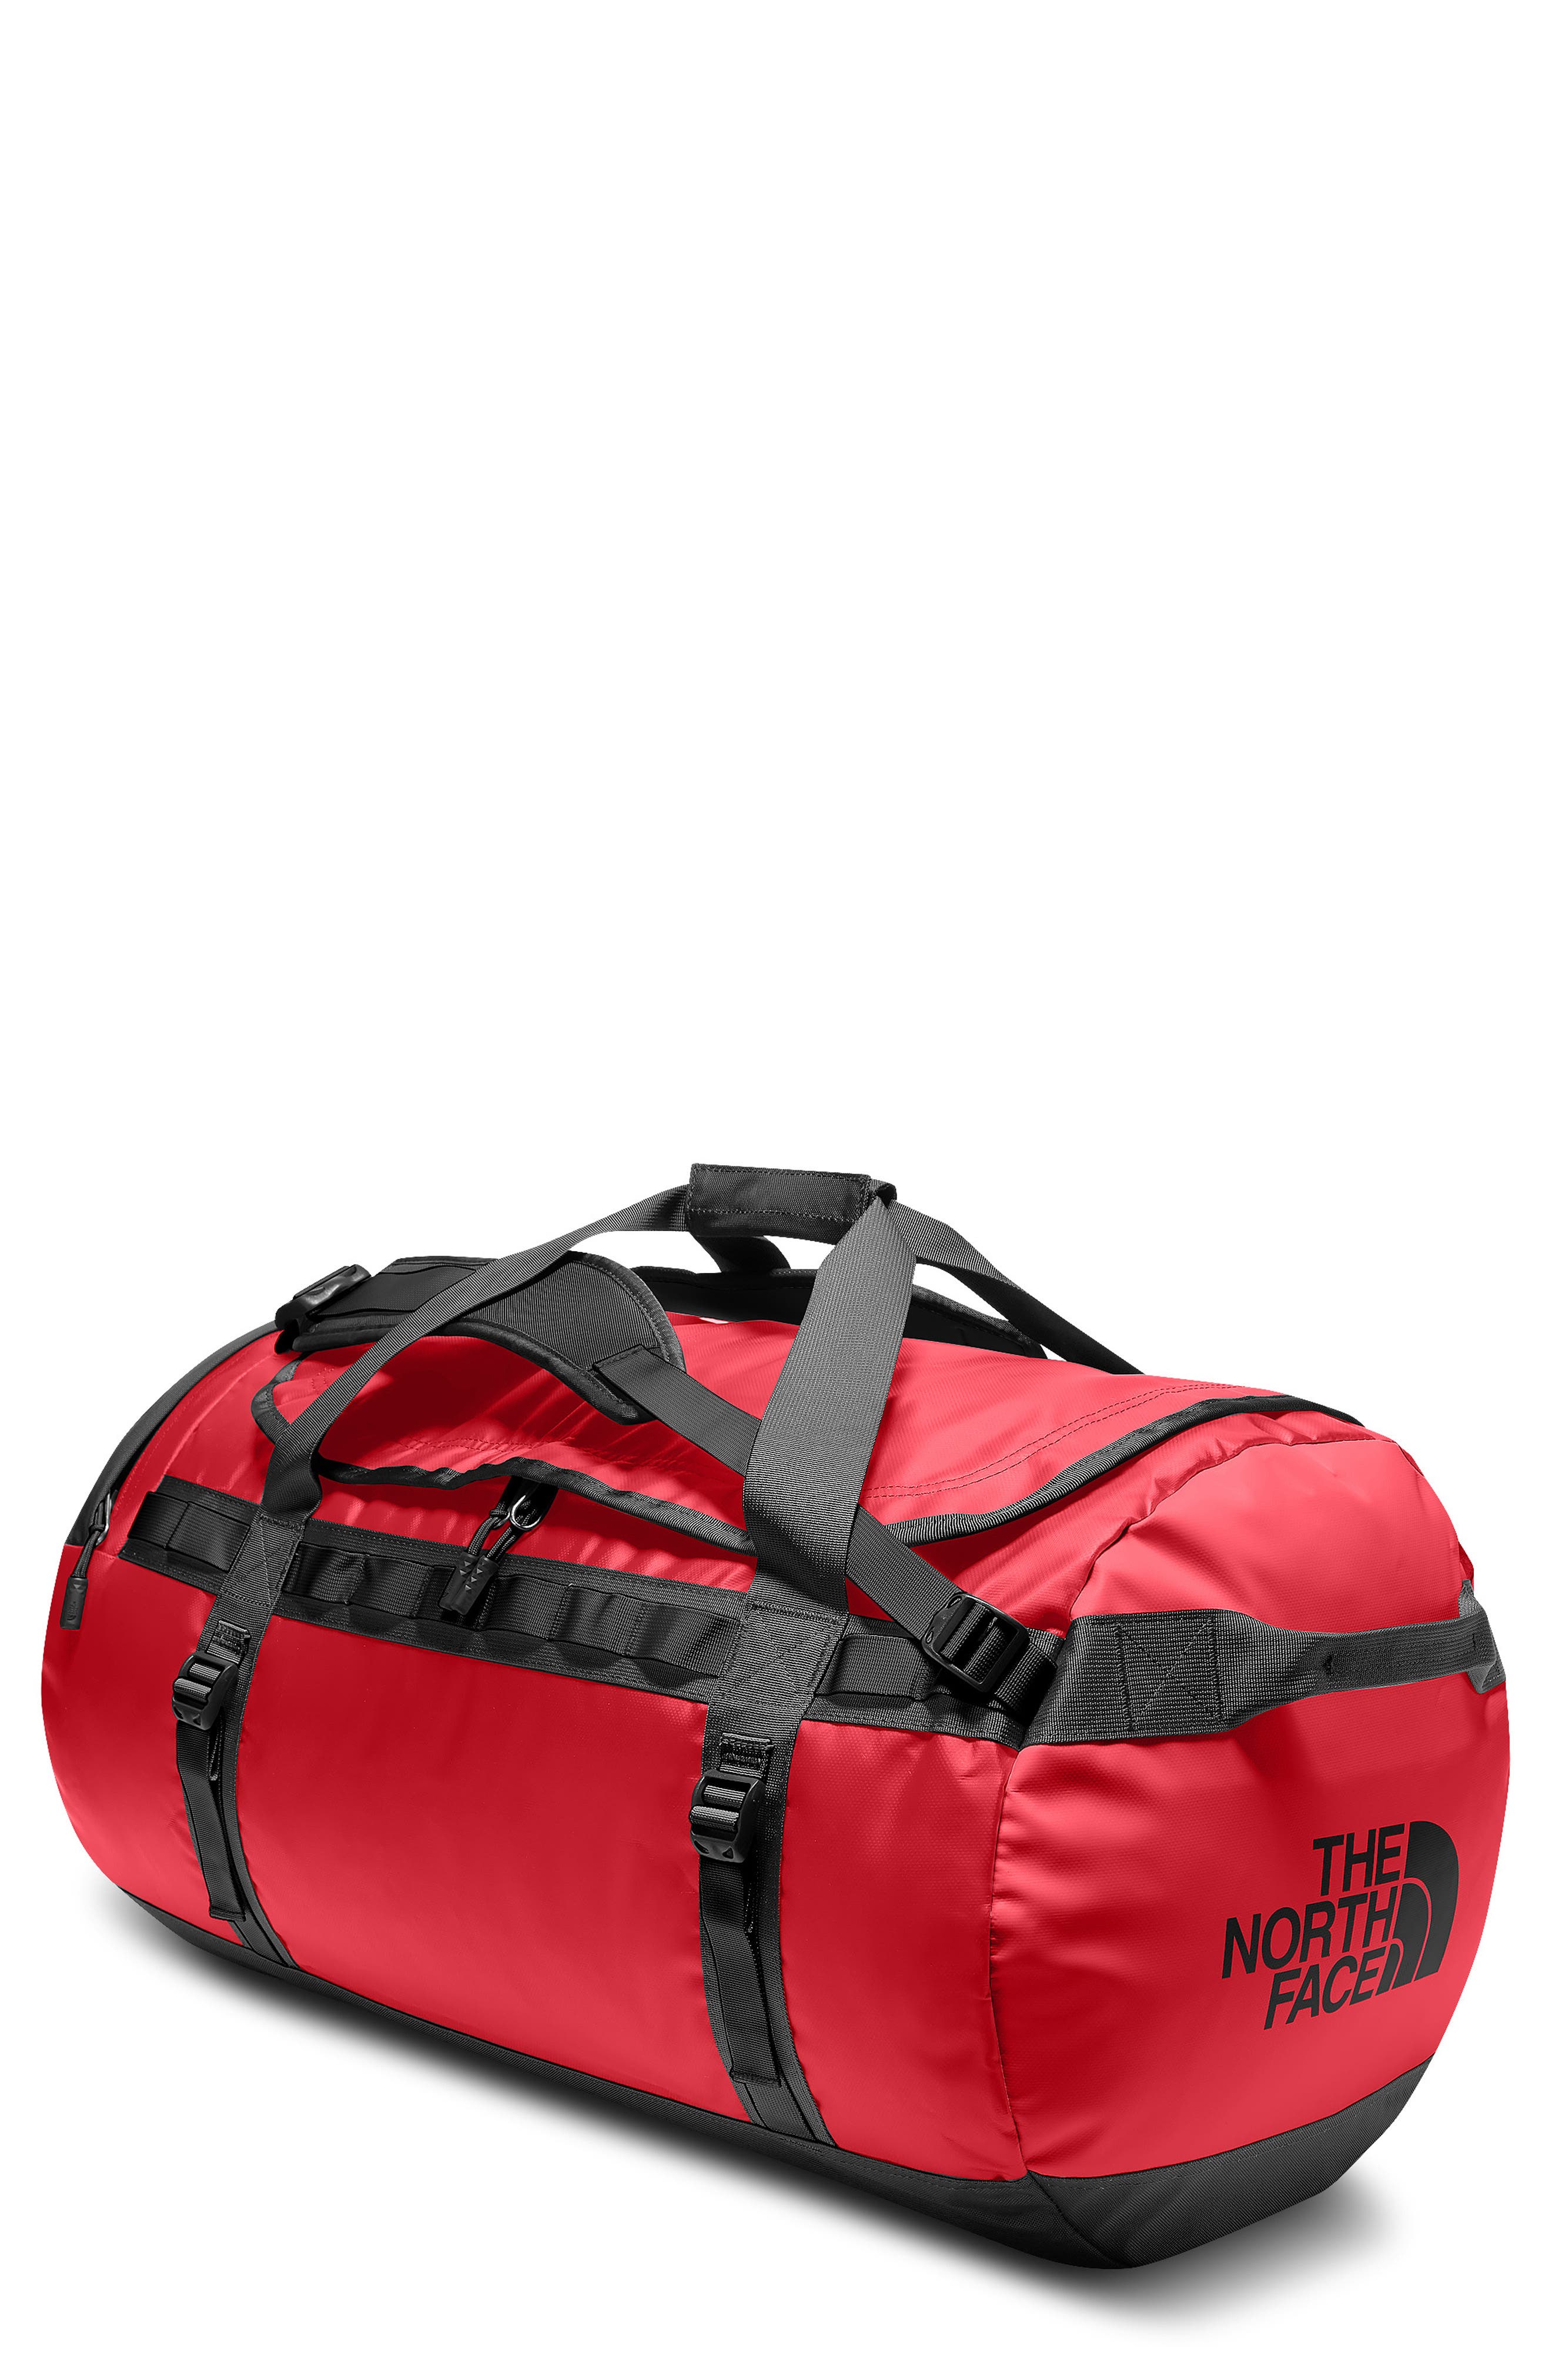 The North Face Base Camp Large Duffle Bag Nordstrom Rack